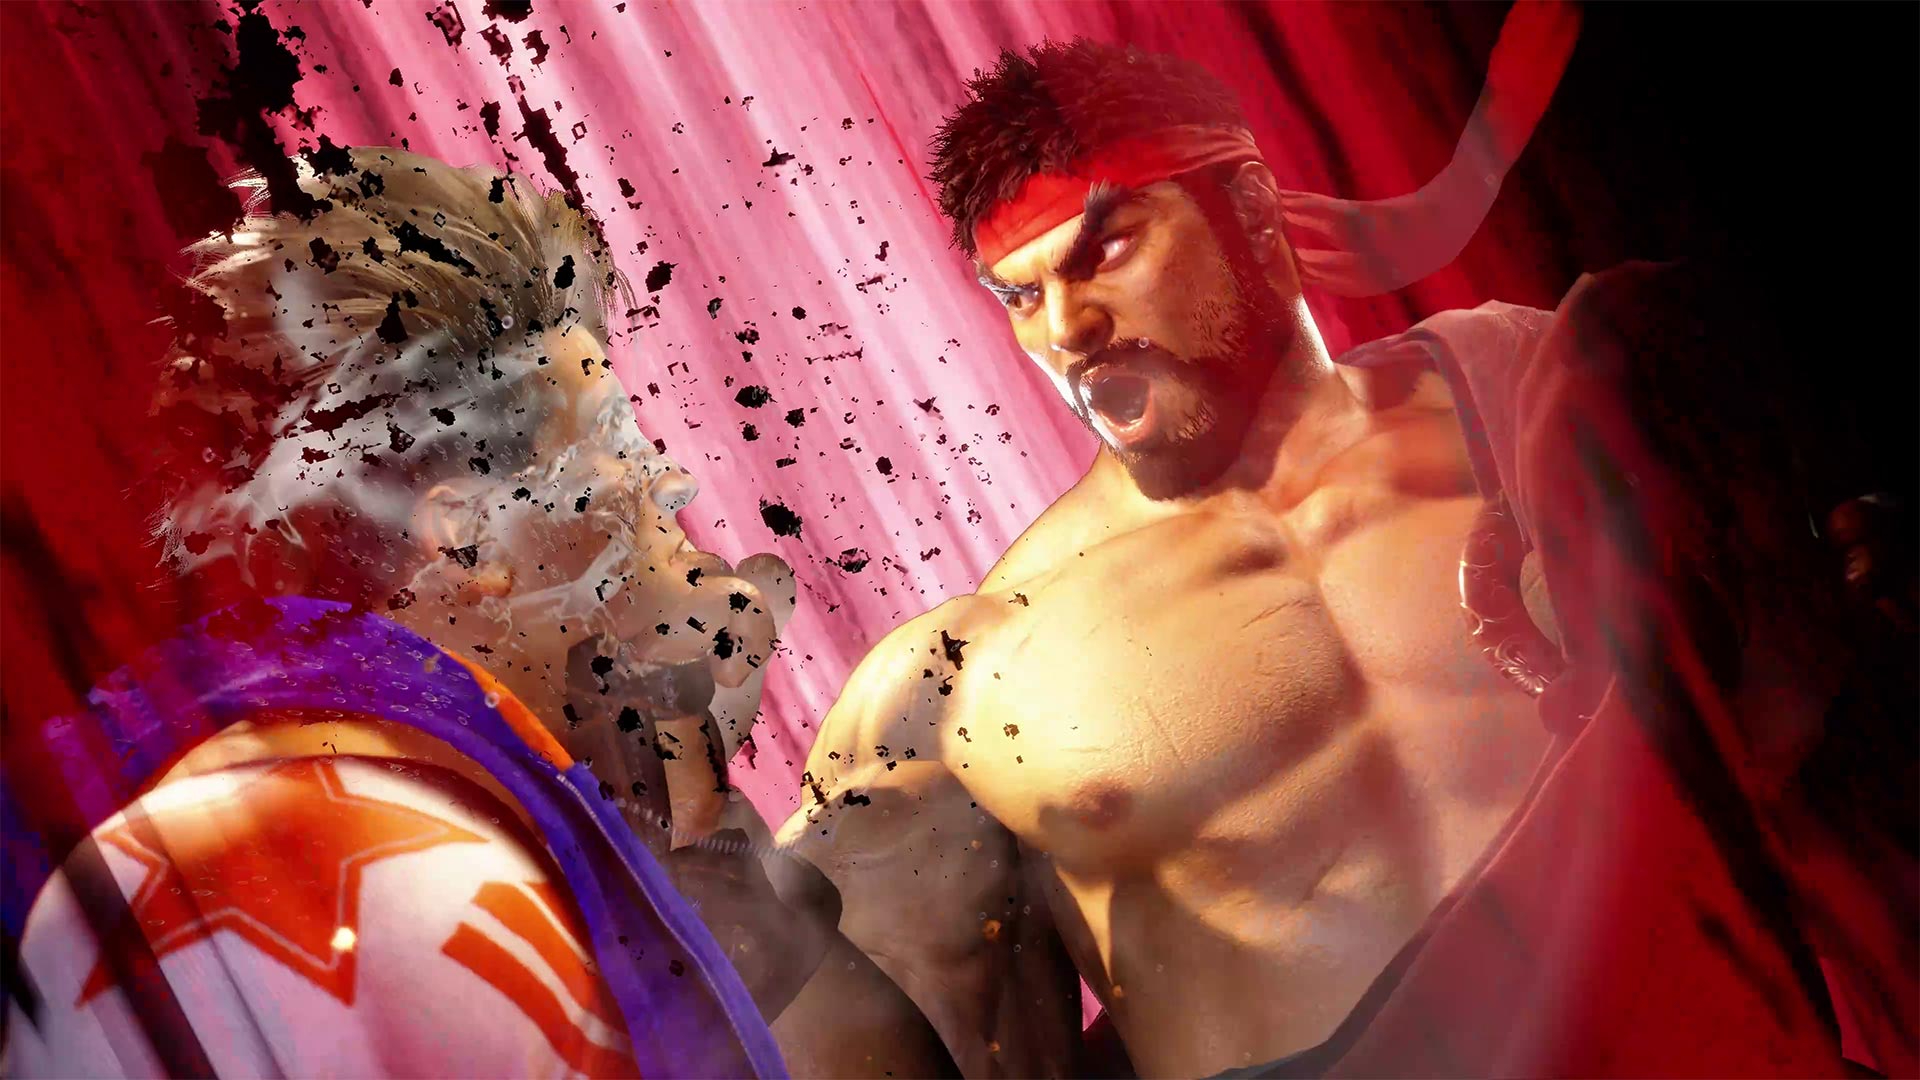 Street Fighter 6 Open Beta Announced; Will Take Place From May 19-21